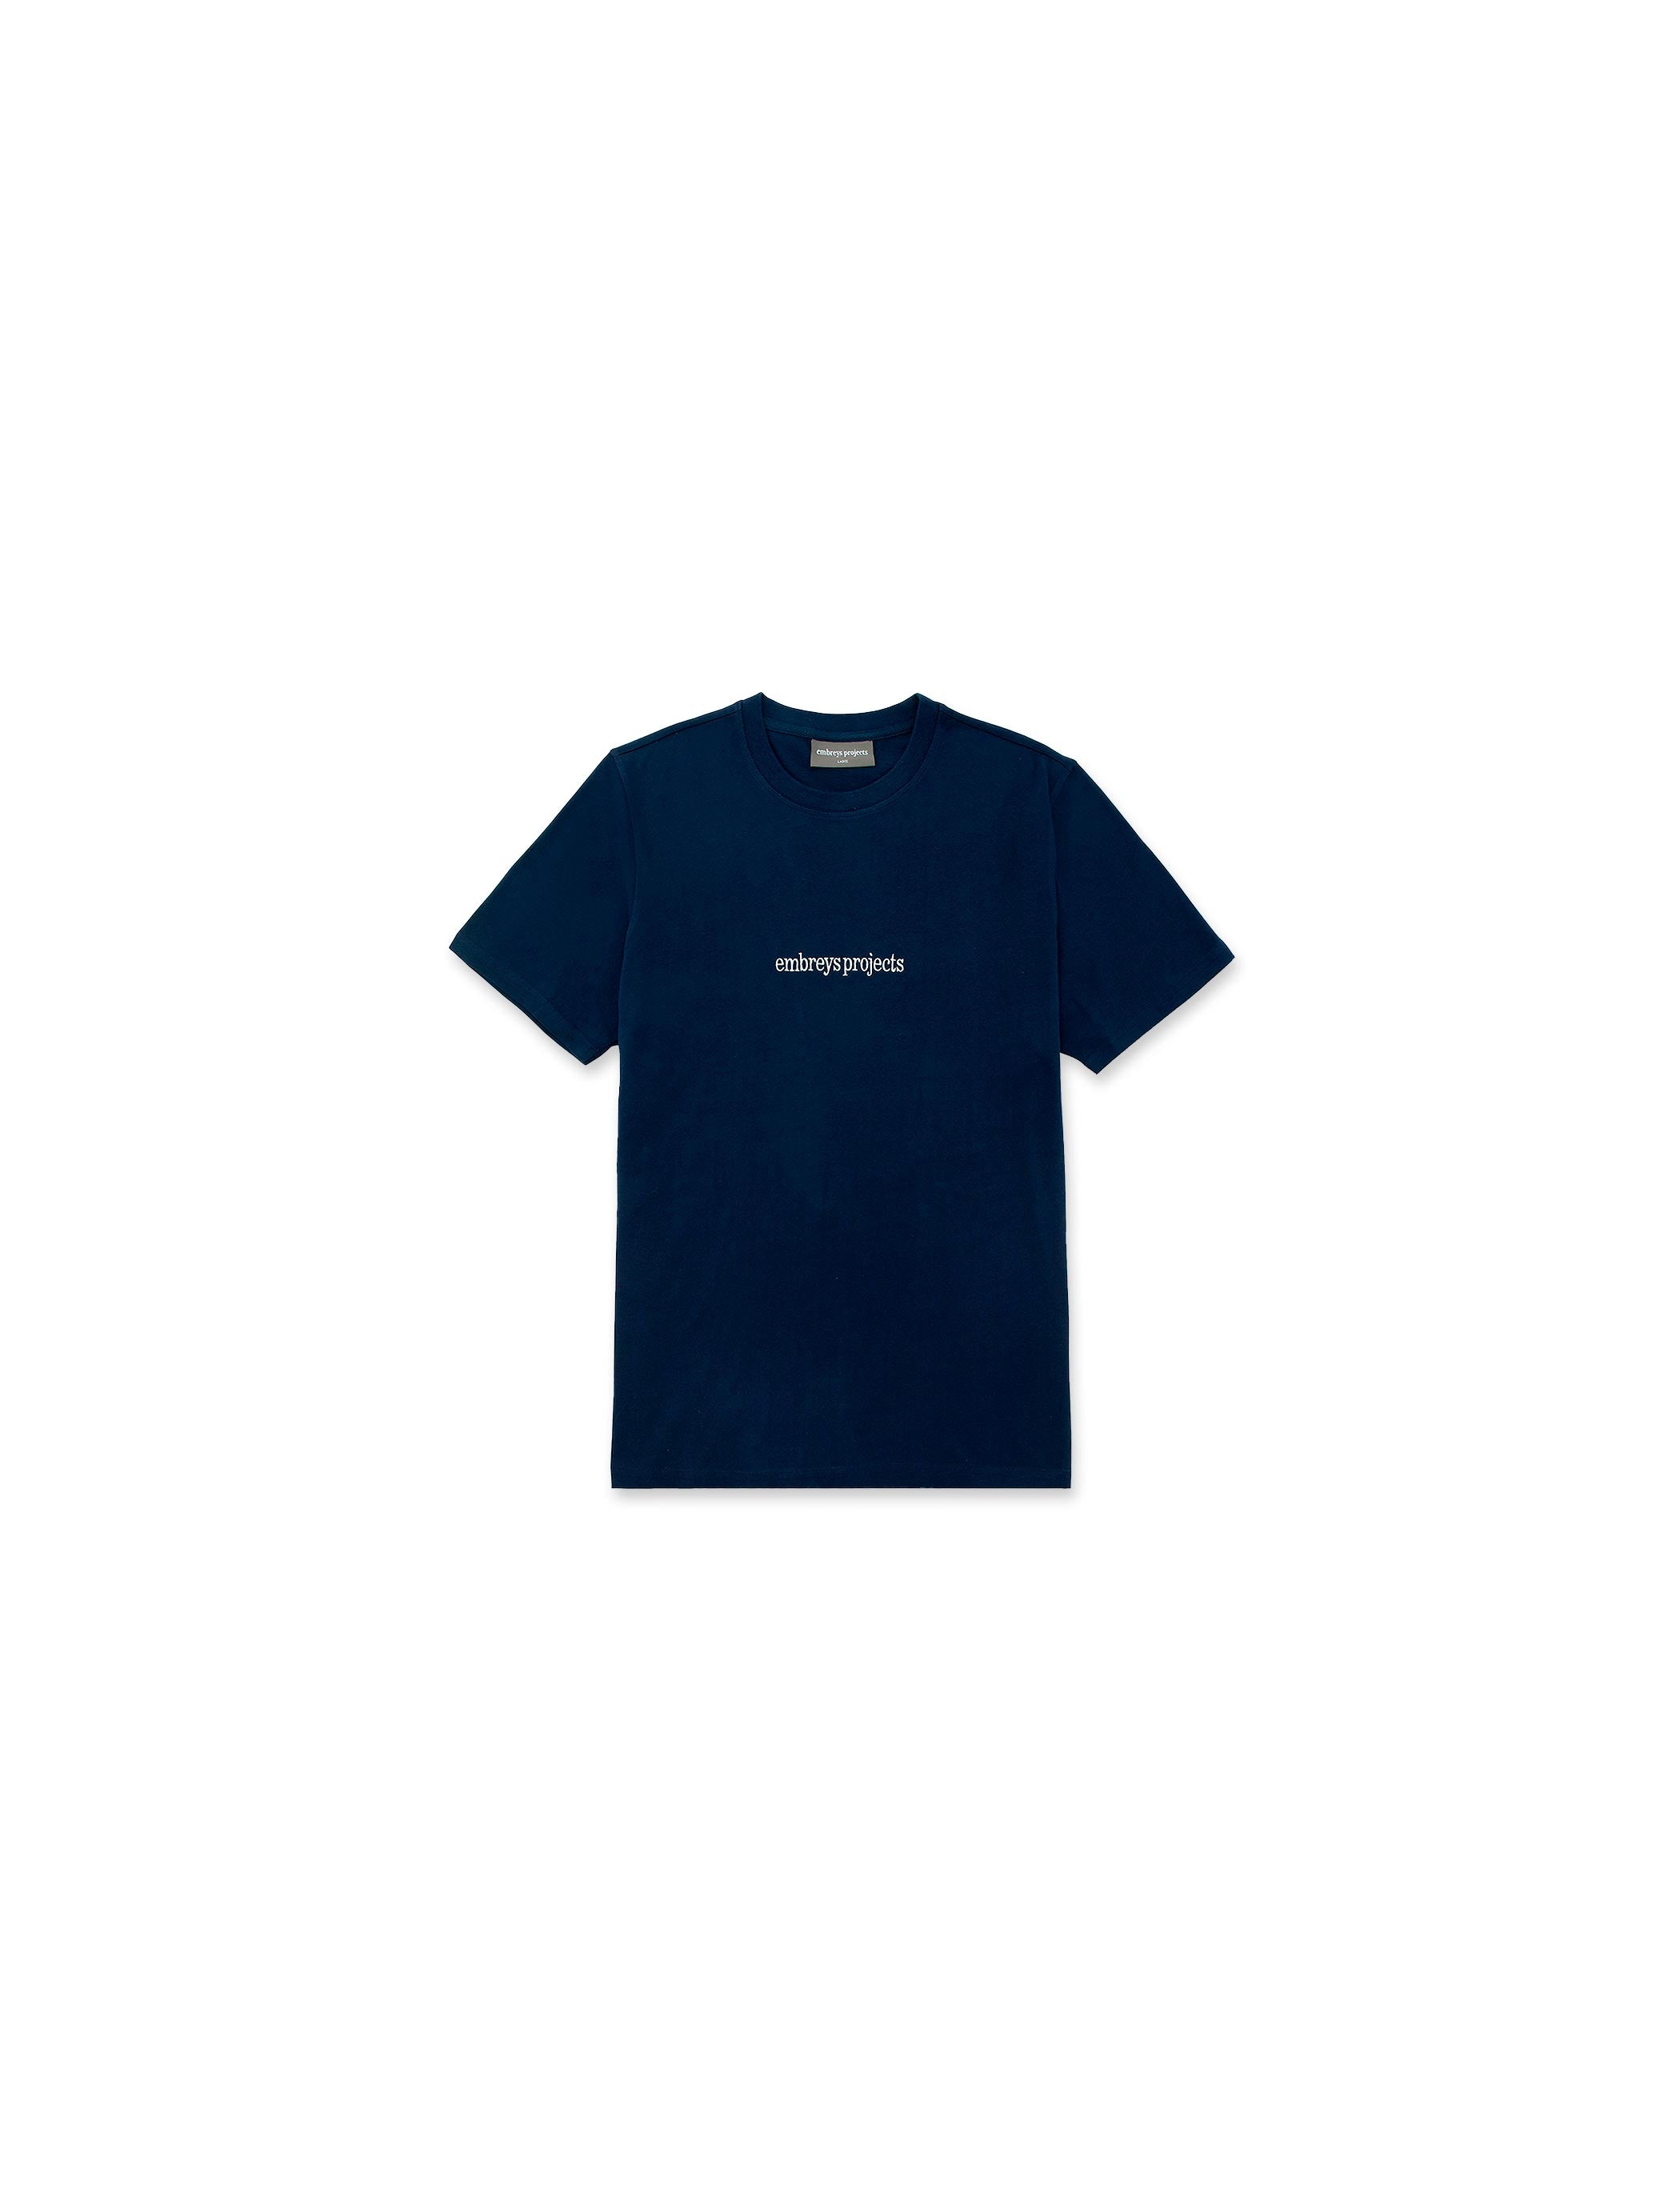 3-PACK ★ ISAAK SS TEE (sort, hvid & navy) - Embreys Projects